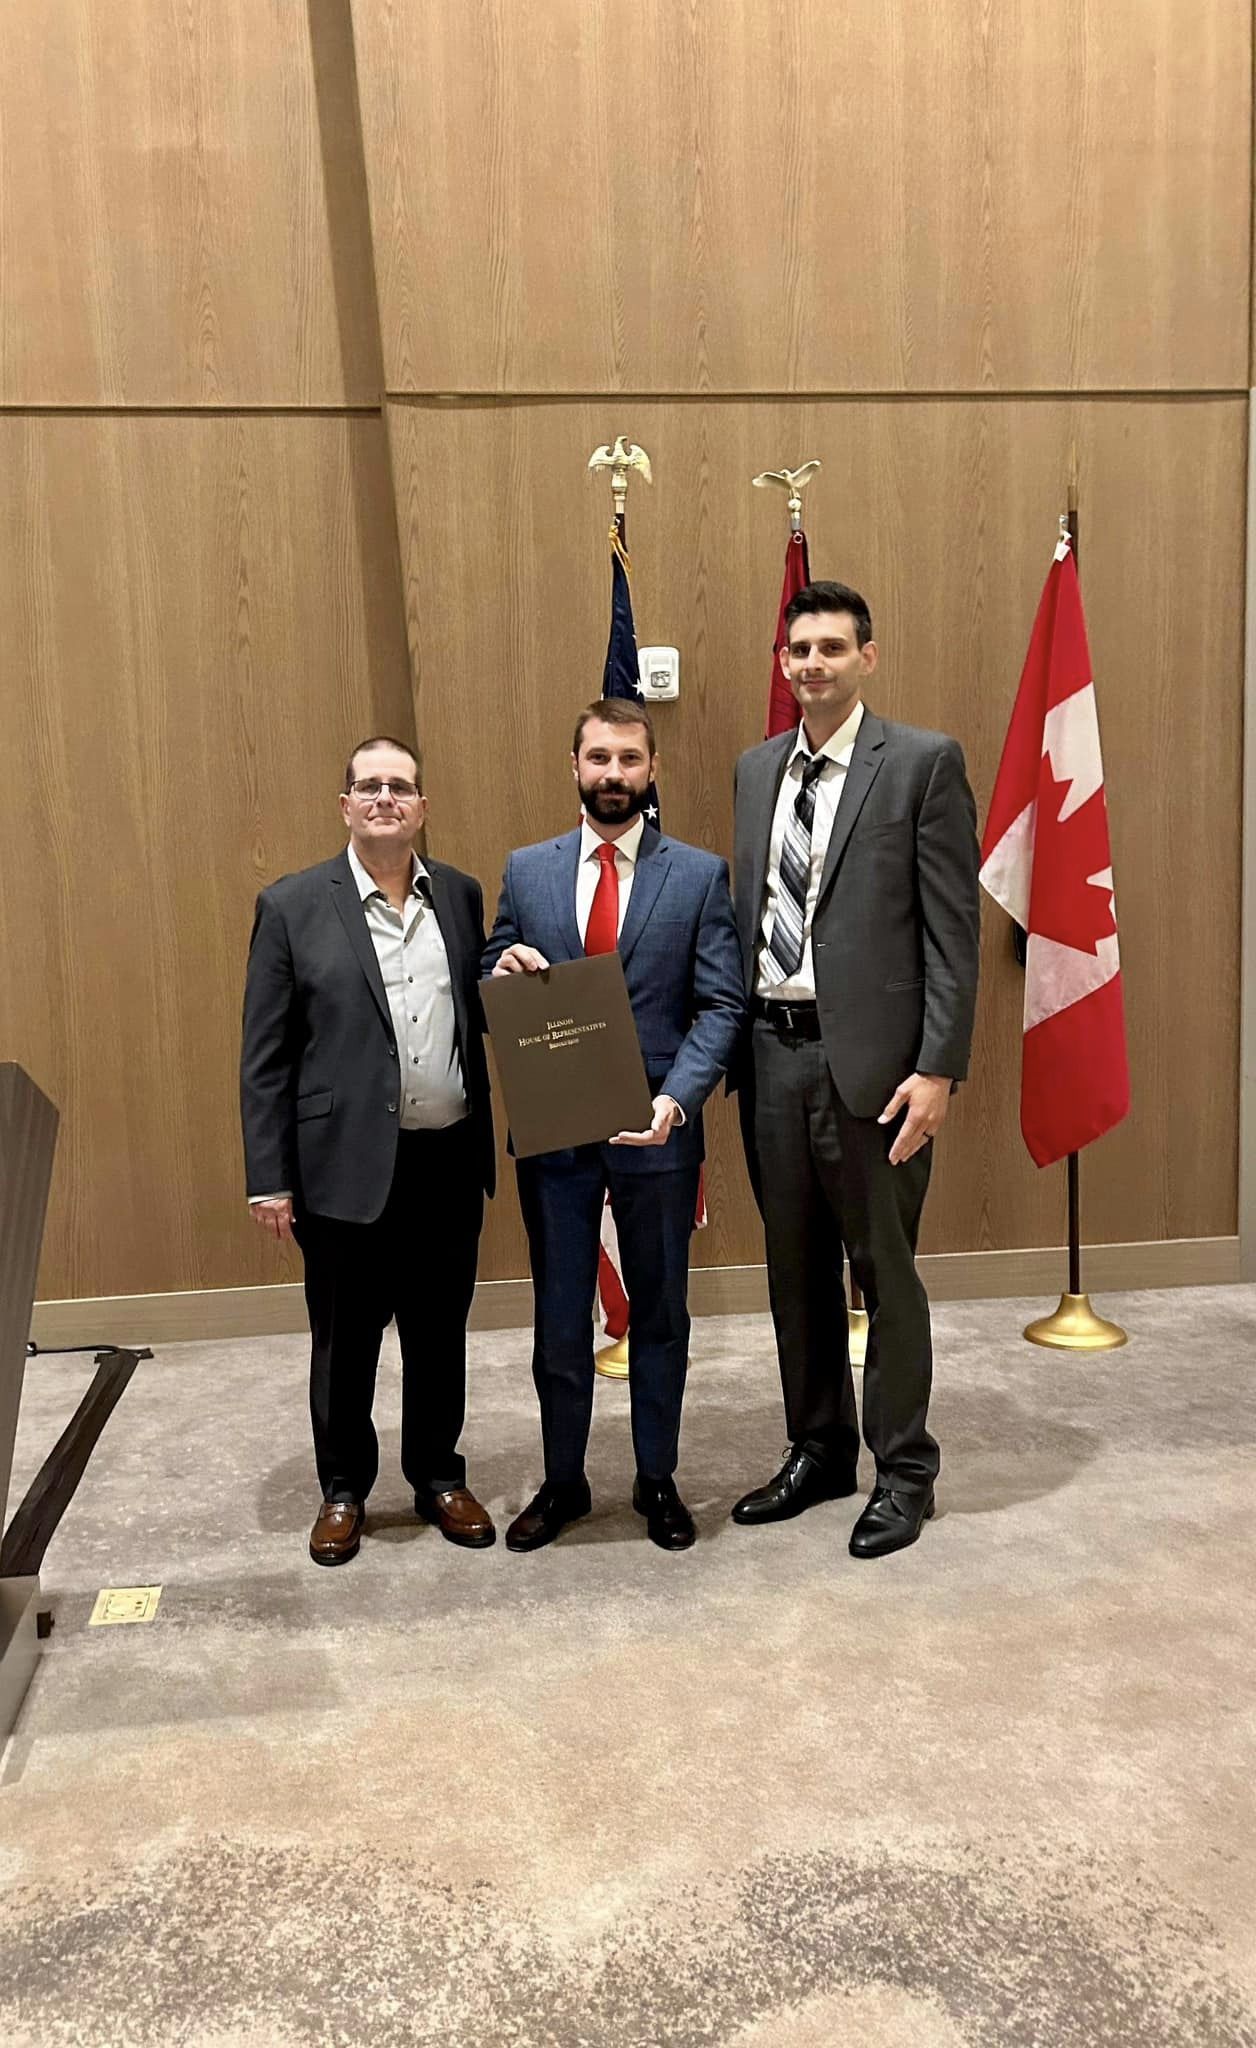 Macedonian Patriotic Organization of the United States and Canada held its 101st Congress in Columbus, Ohio